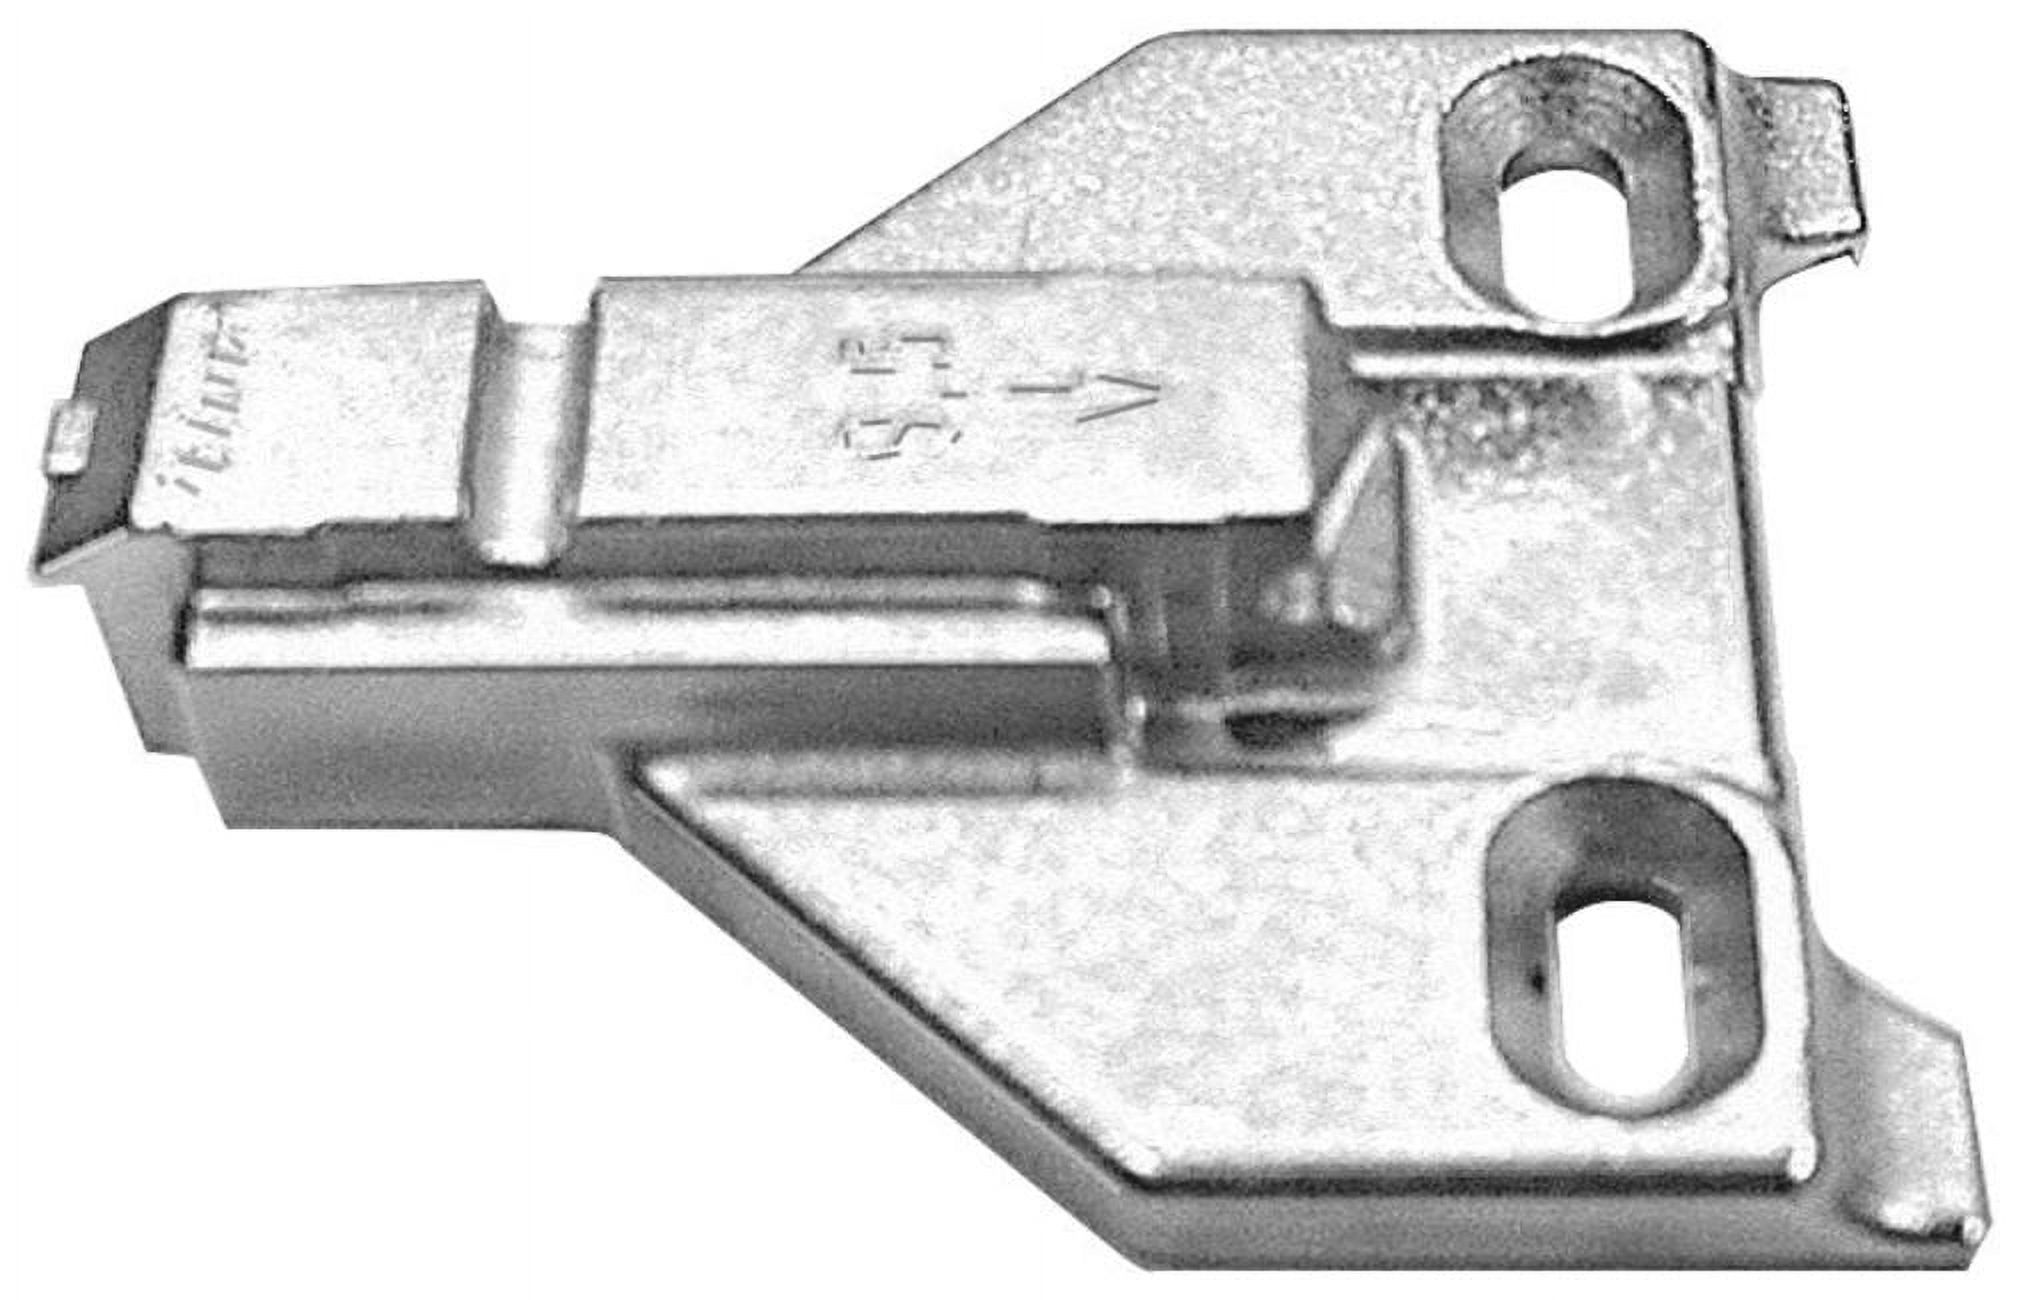 Blum 175L6030.21 Clip Top Face Frame Adapter Plate - Nickel - image 1 of 2